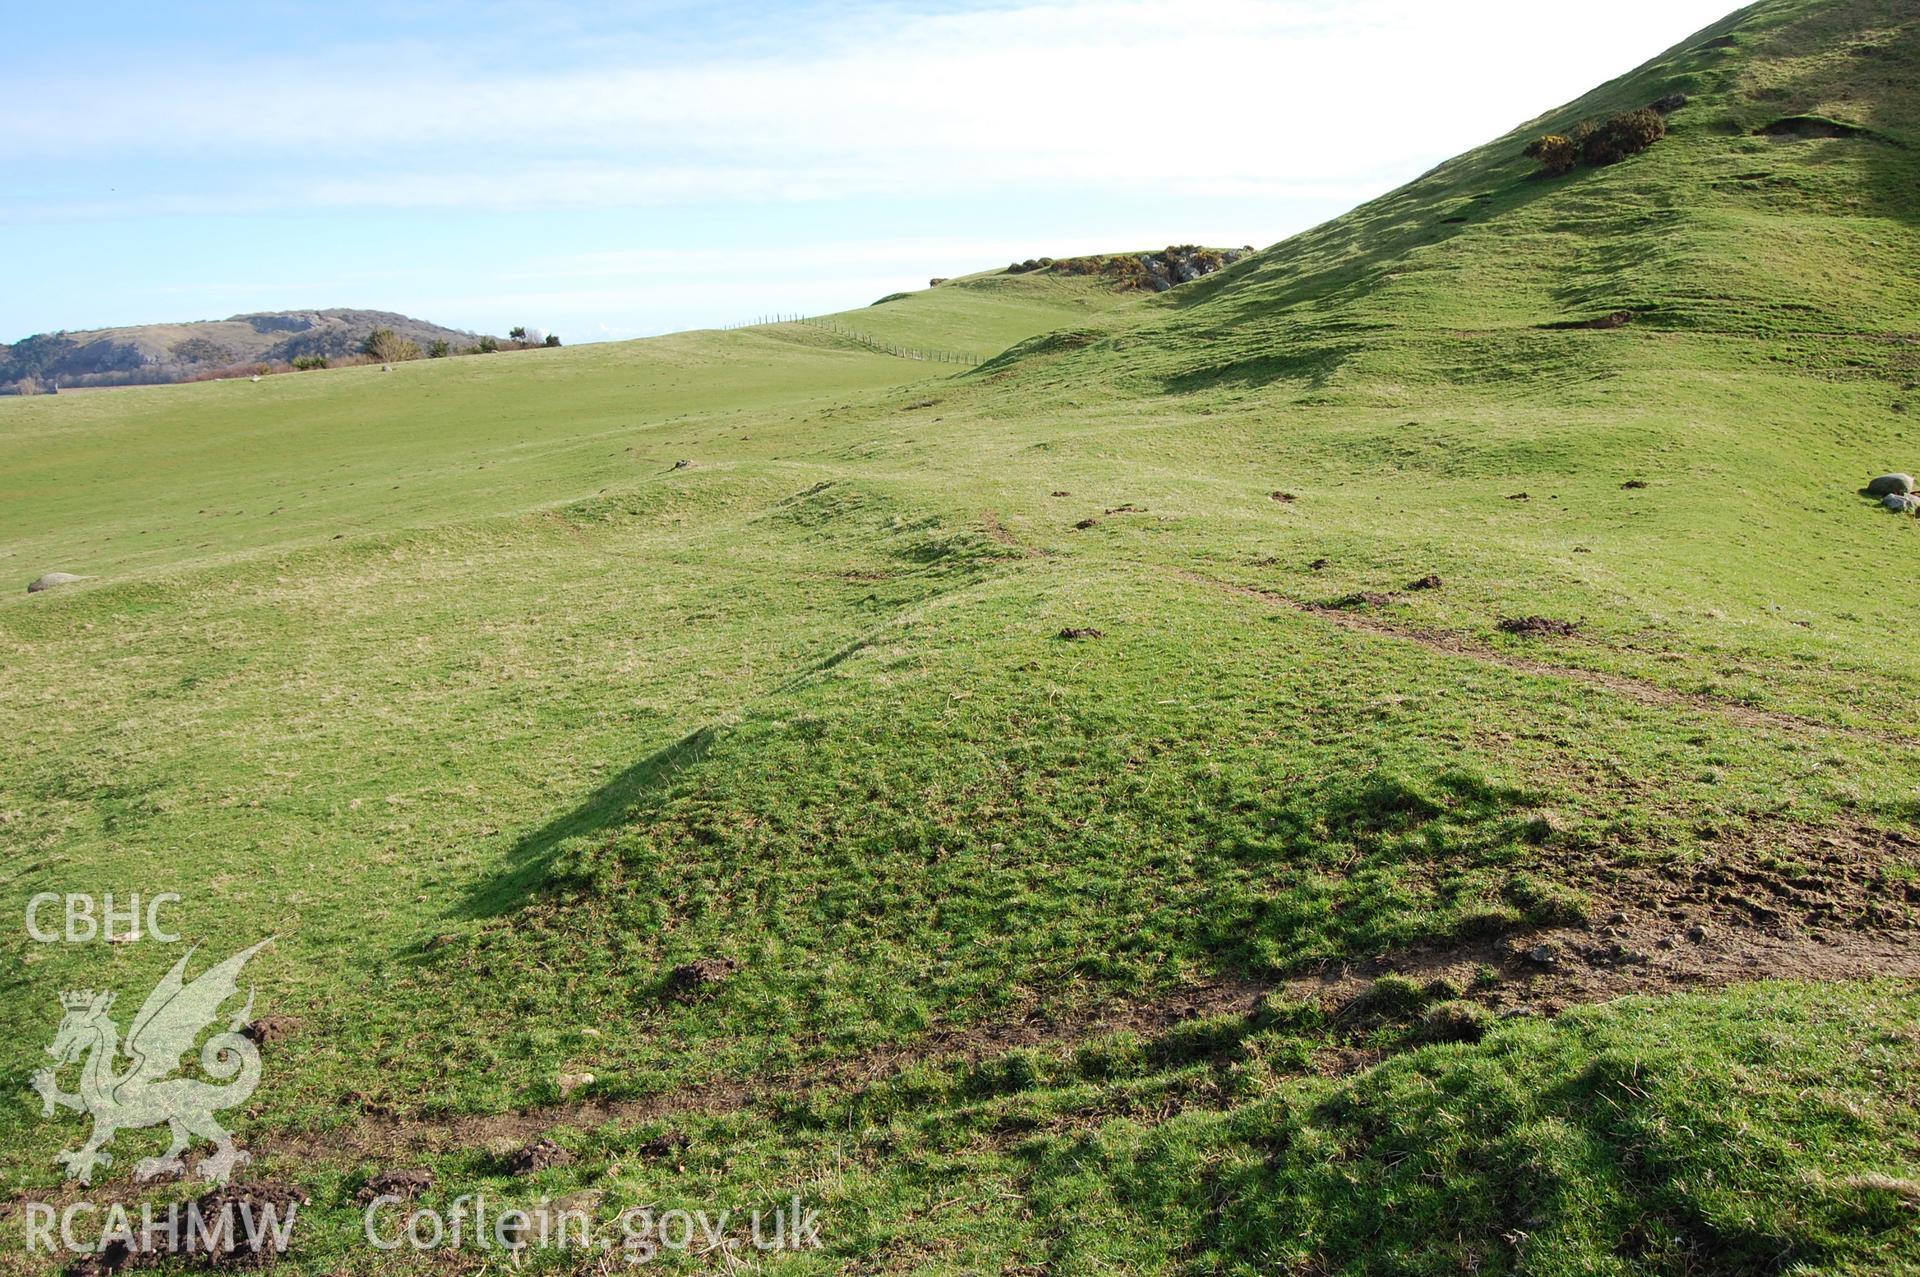 Digital photograph from an archaeological assessment of Deganwy Castle, carried out by Gwynedd Archaeological Trust, 2009. Road running to North gate and Vardre North settlement.